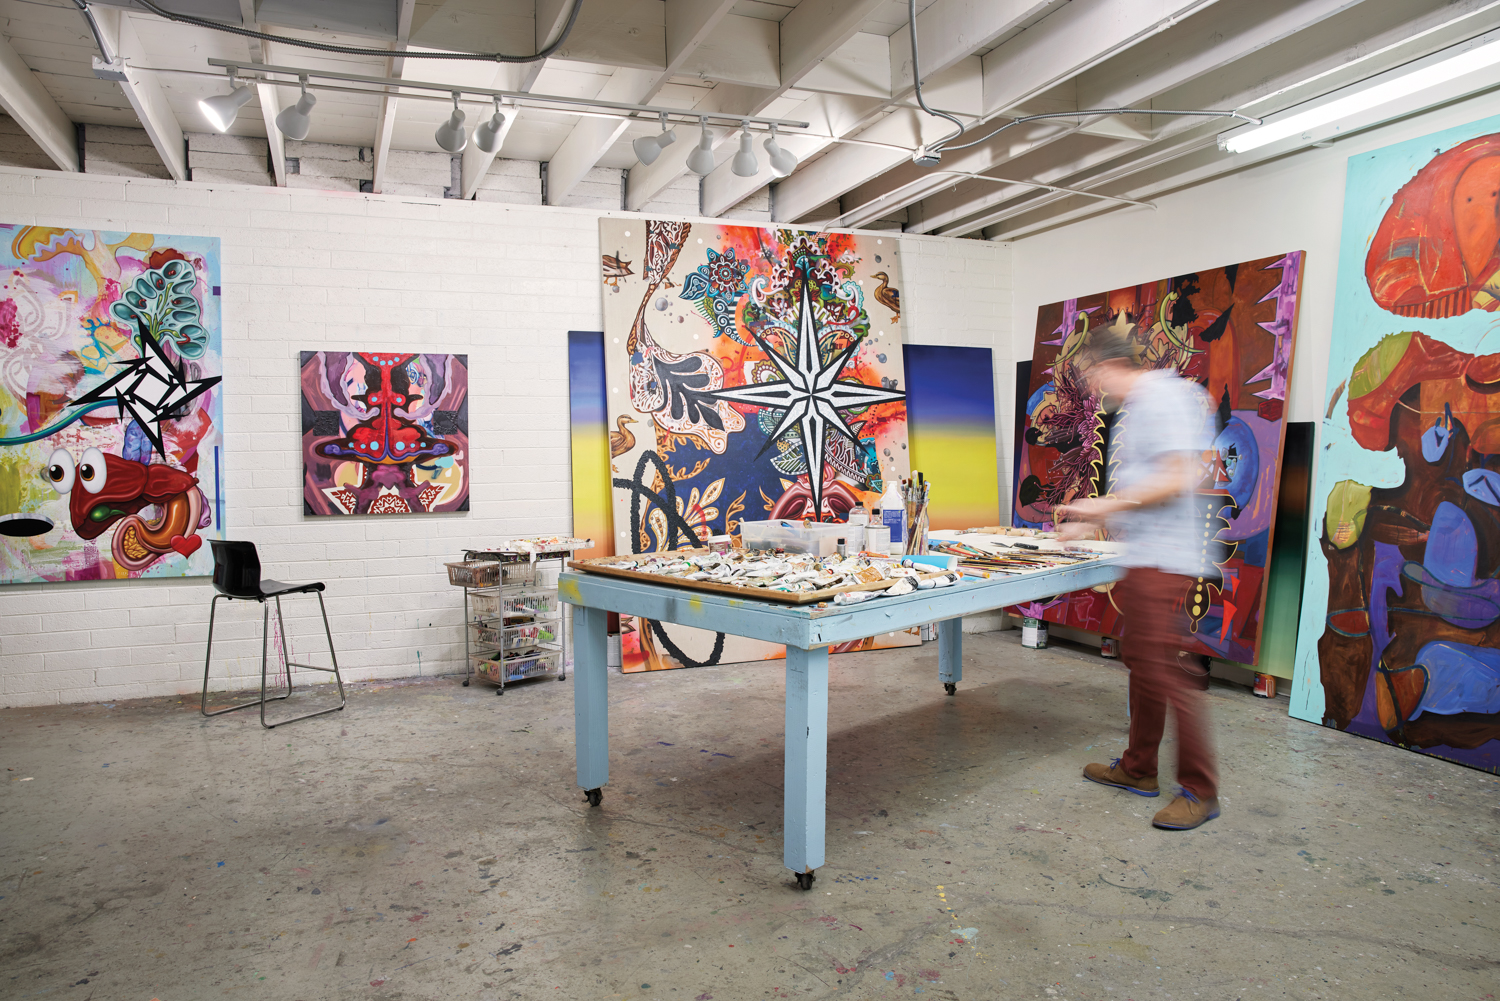 An artist in a large studio with large, colorful paintings on the walls.